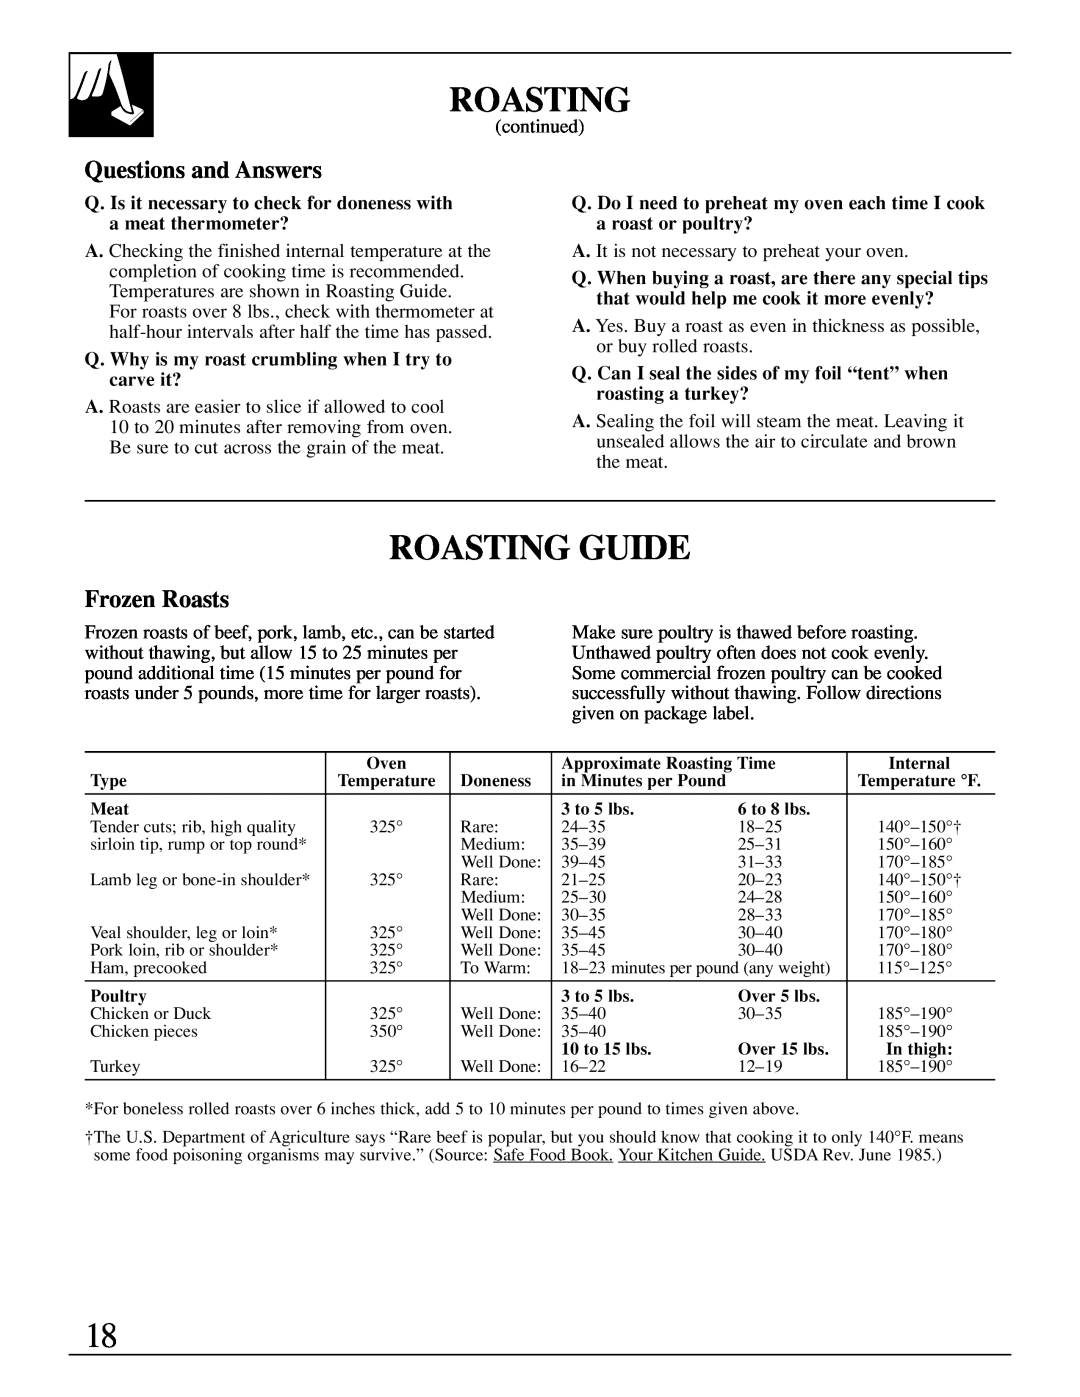 GE XL44 Roasting Guide, Questions and Answers, Frozen Roasts, Q. Is it necessary to check for doneness with, carve it? 